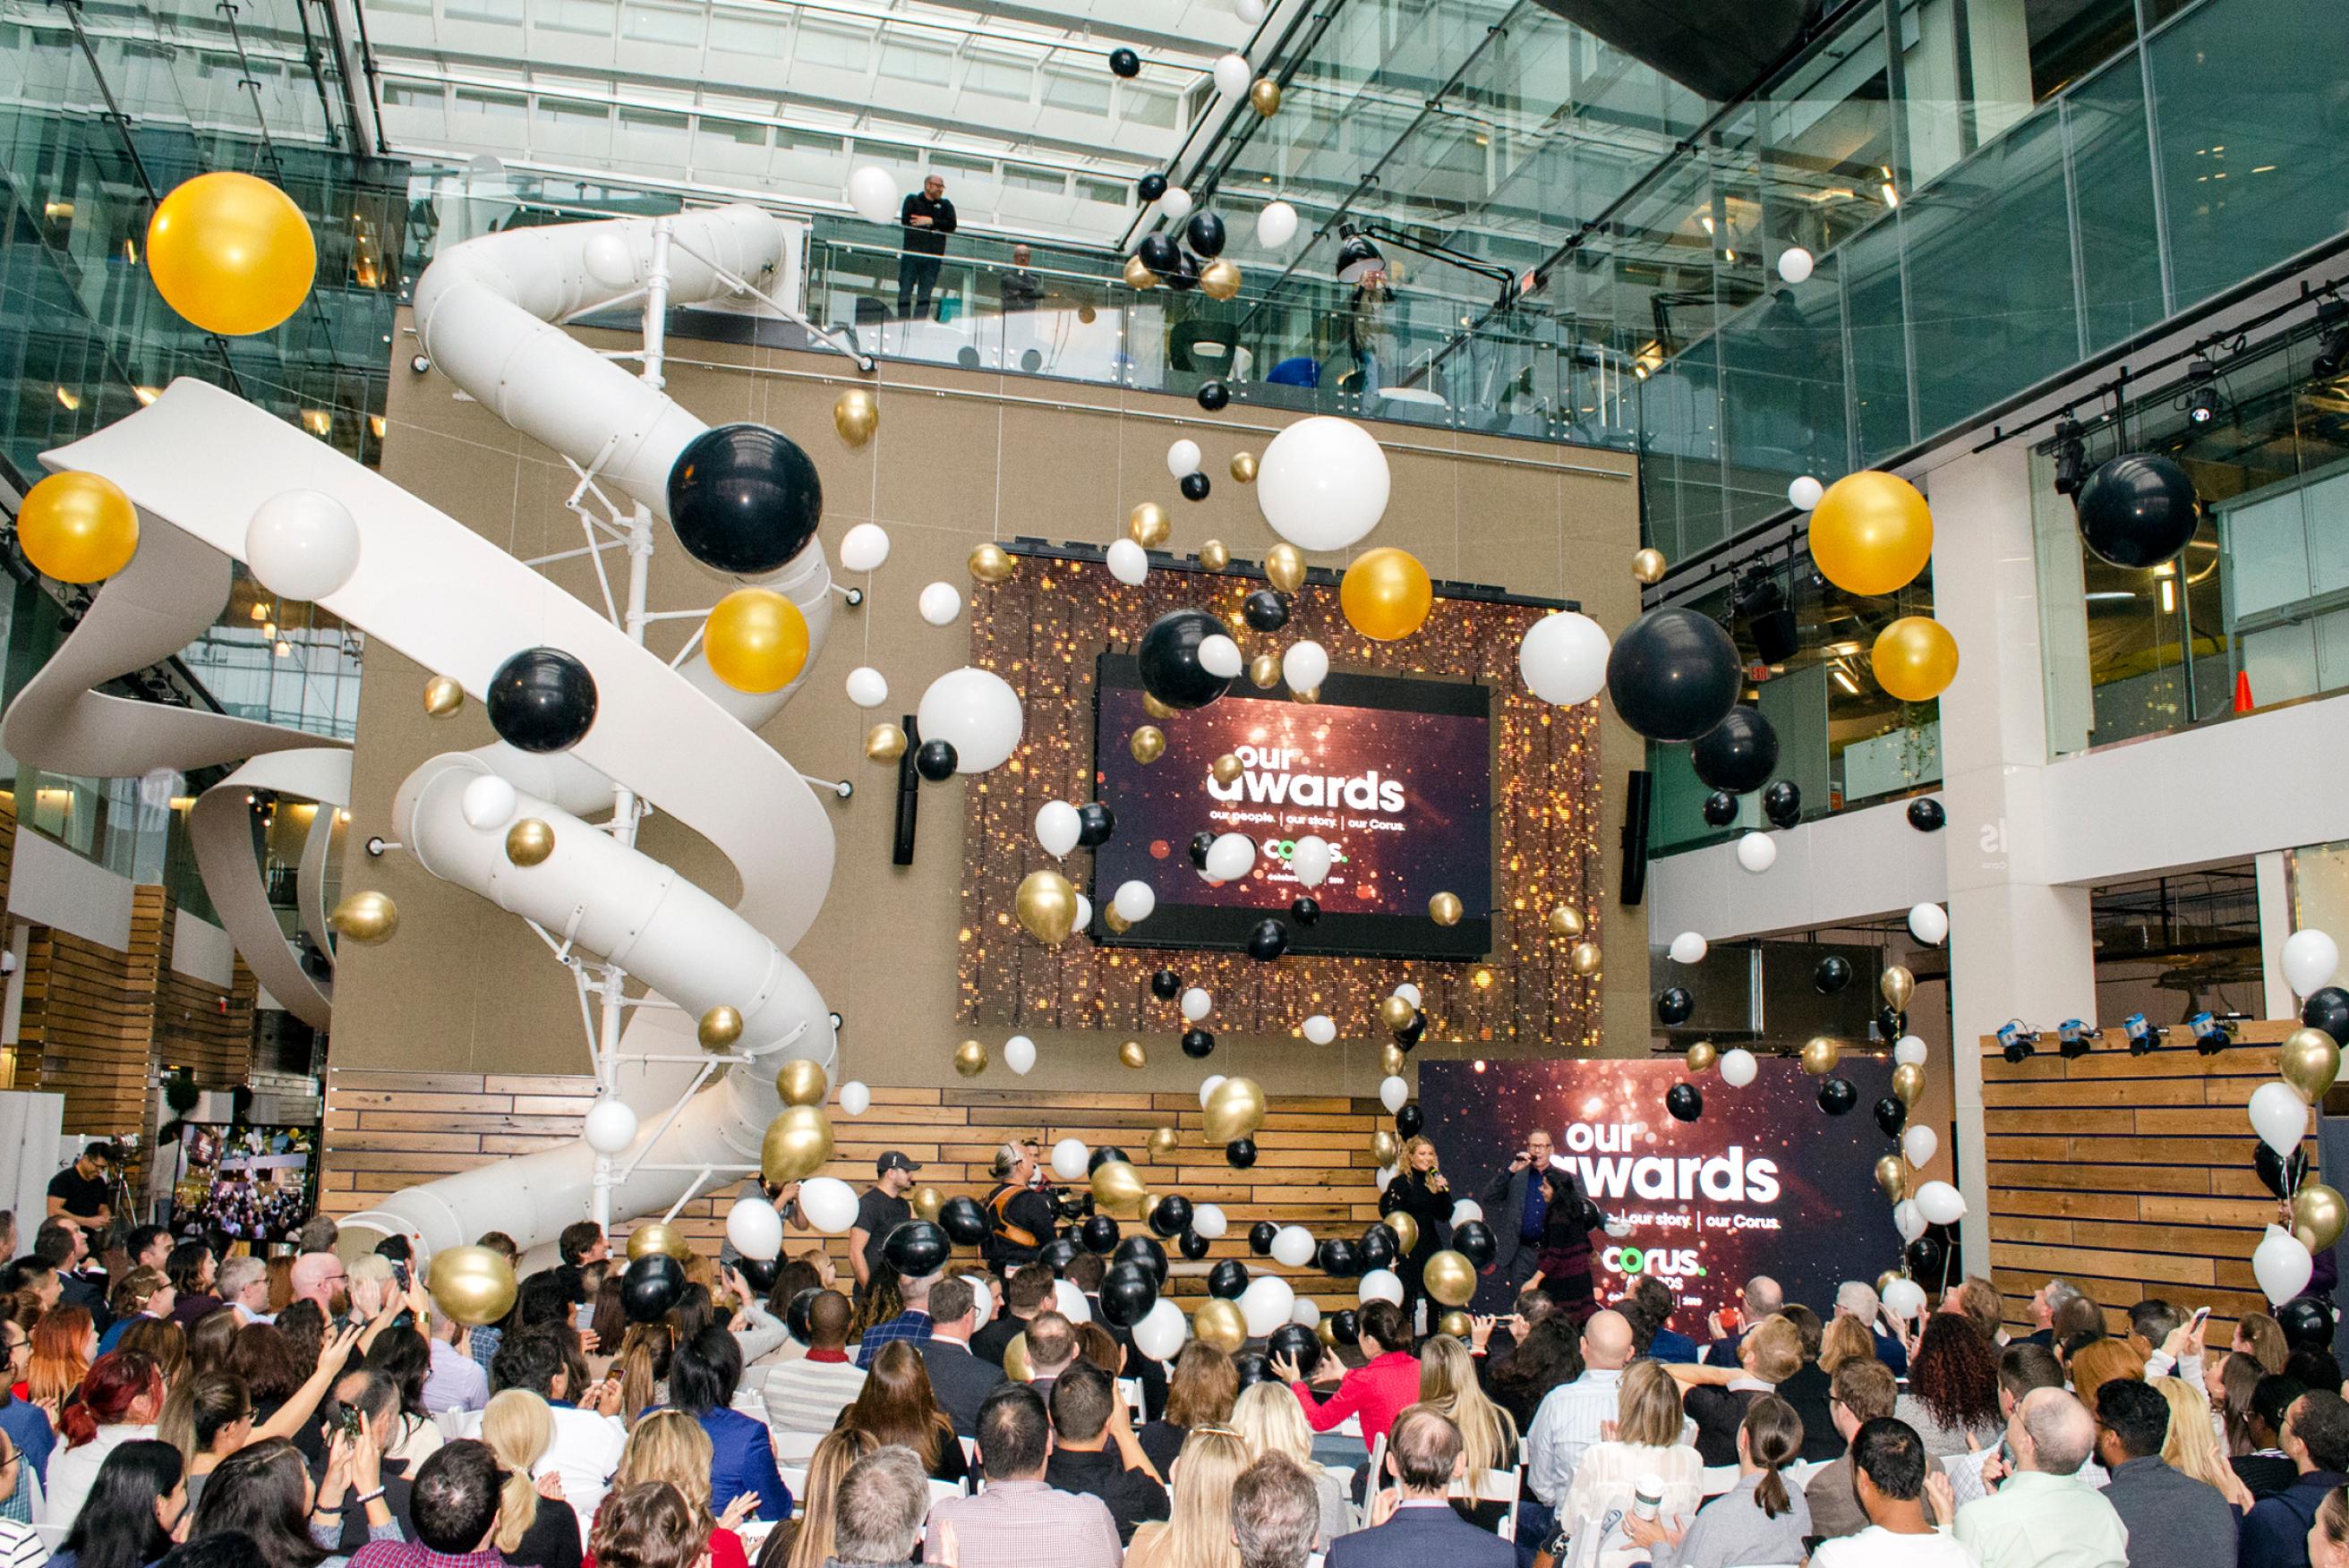 Photo of the inside of the Corus main lobby where many people are gathered to celebrate.